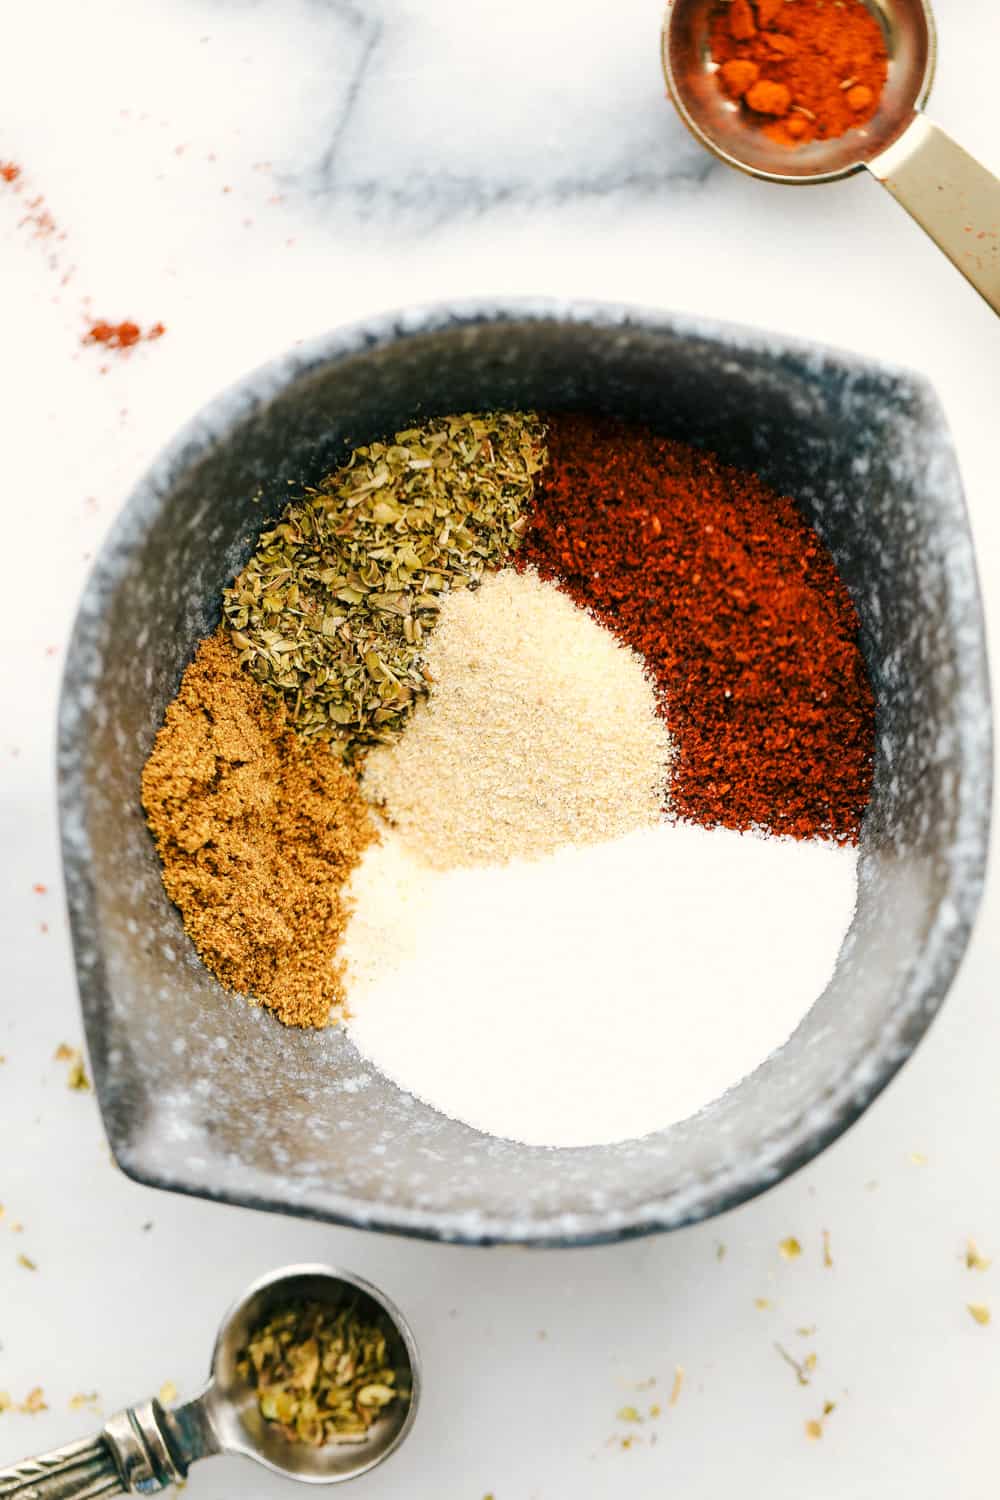 Easy Meat Seasoning - Homemade Spice Mix for Meat 